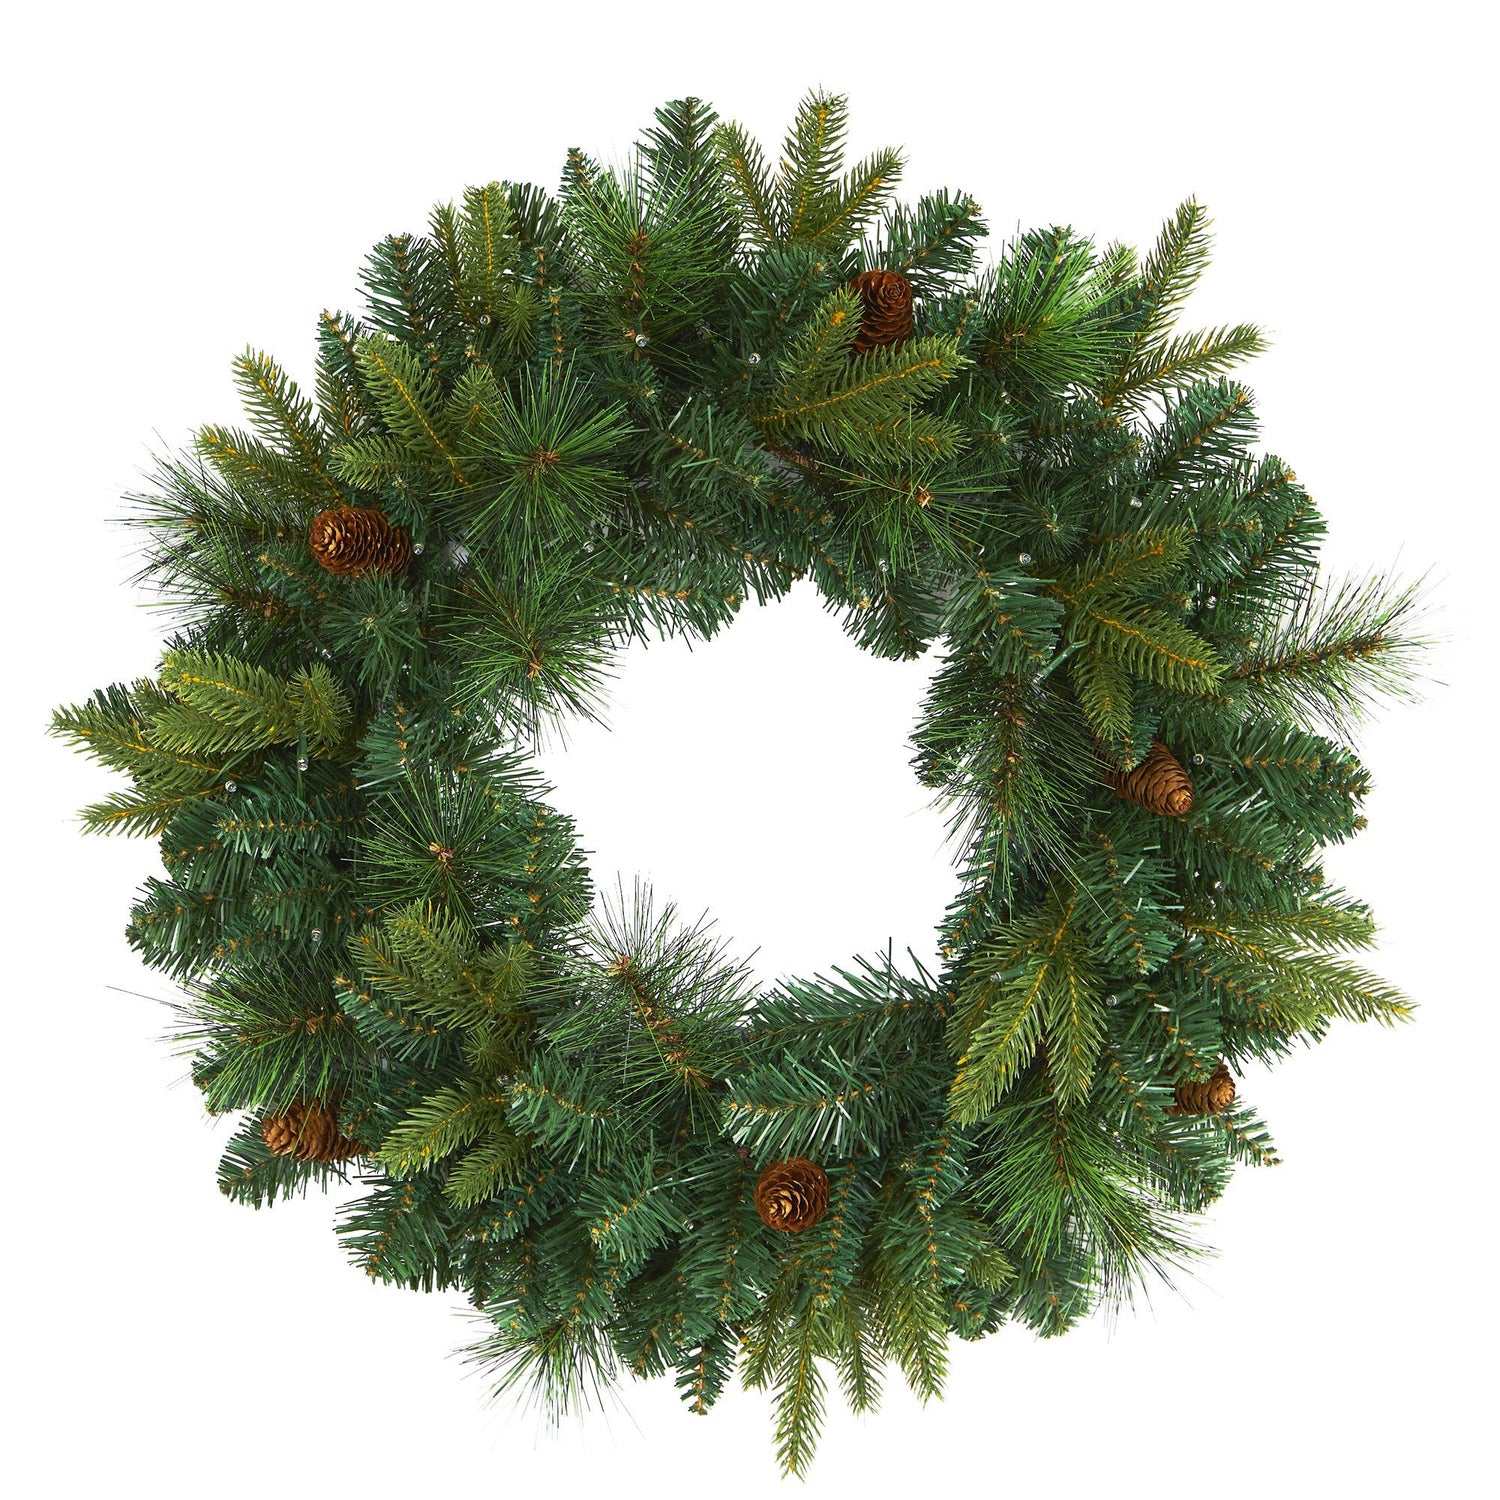 24” Mixed Pine Artificial Christmas Wreath with 35 Clear LED Lights and Pinecones